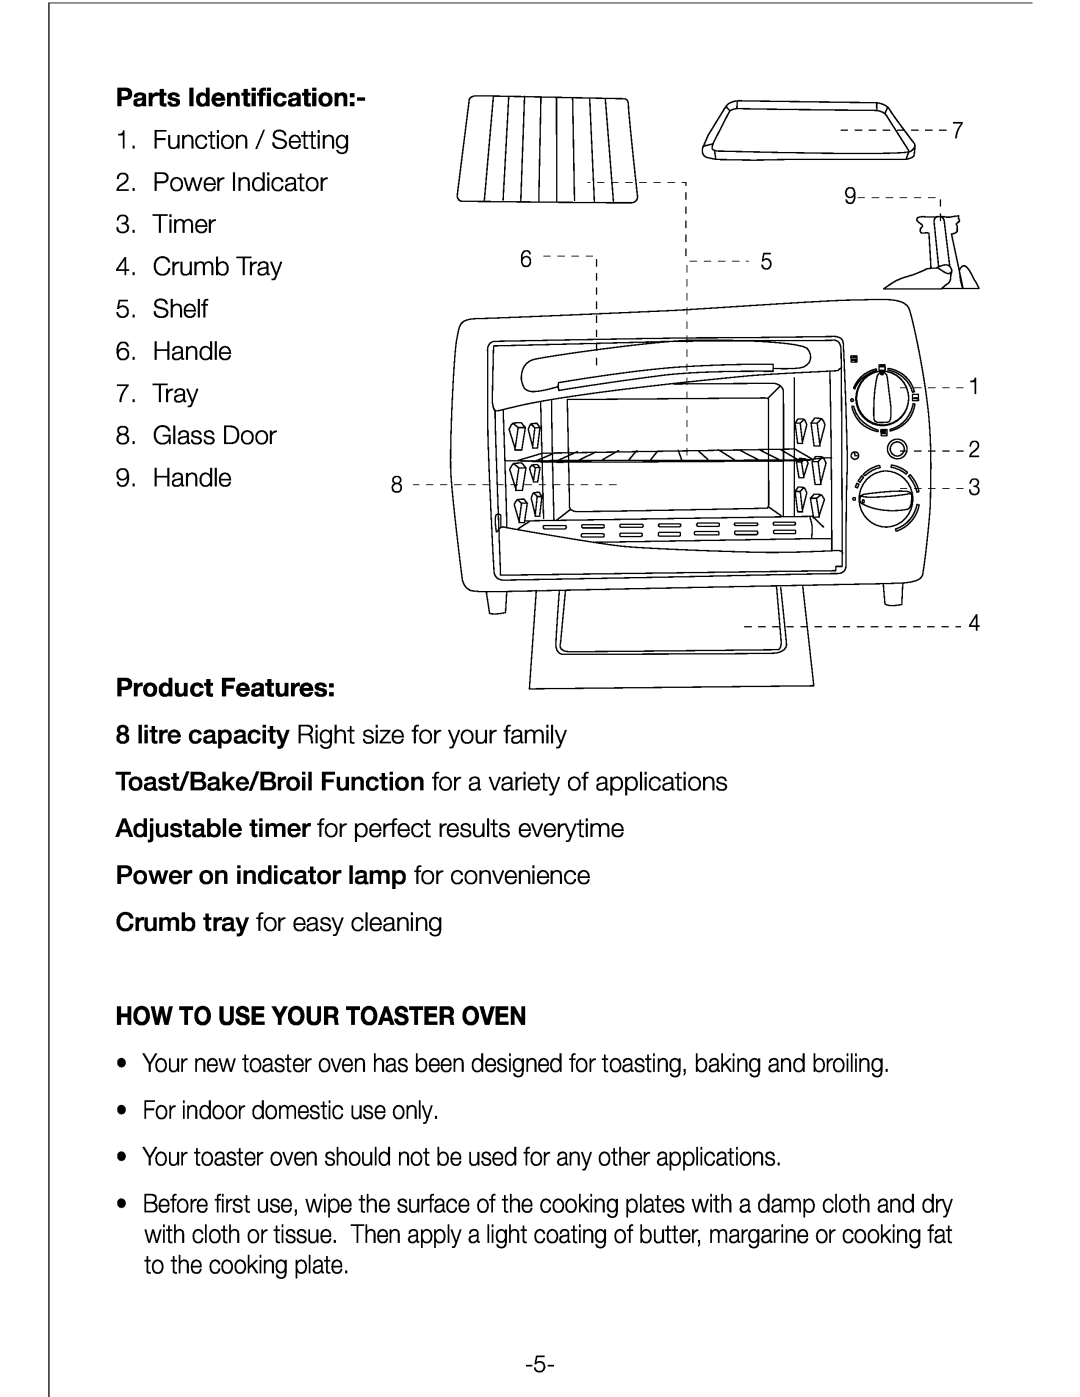 Black & Decker TRO18 manual Parts Identification, Product Features, How To Use Your Toaster Oven 